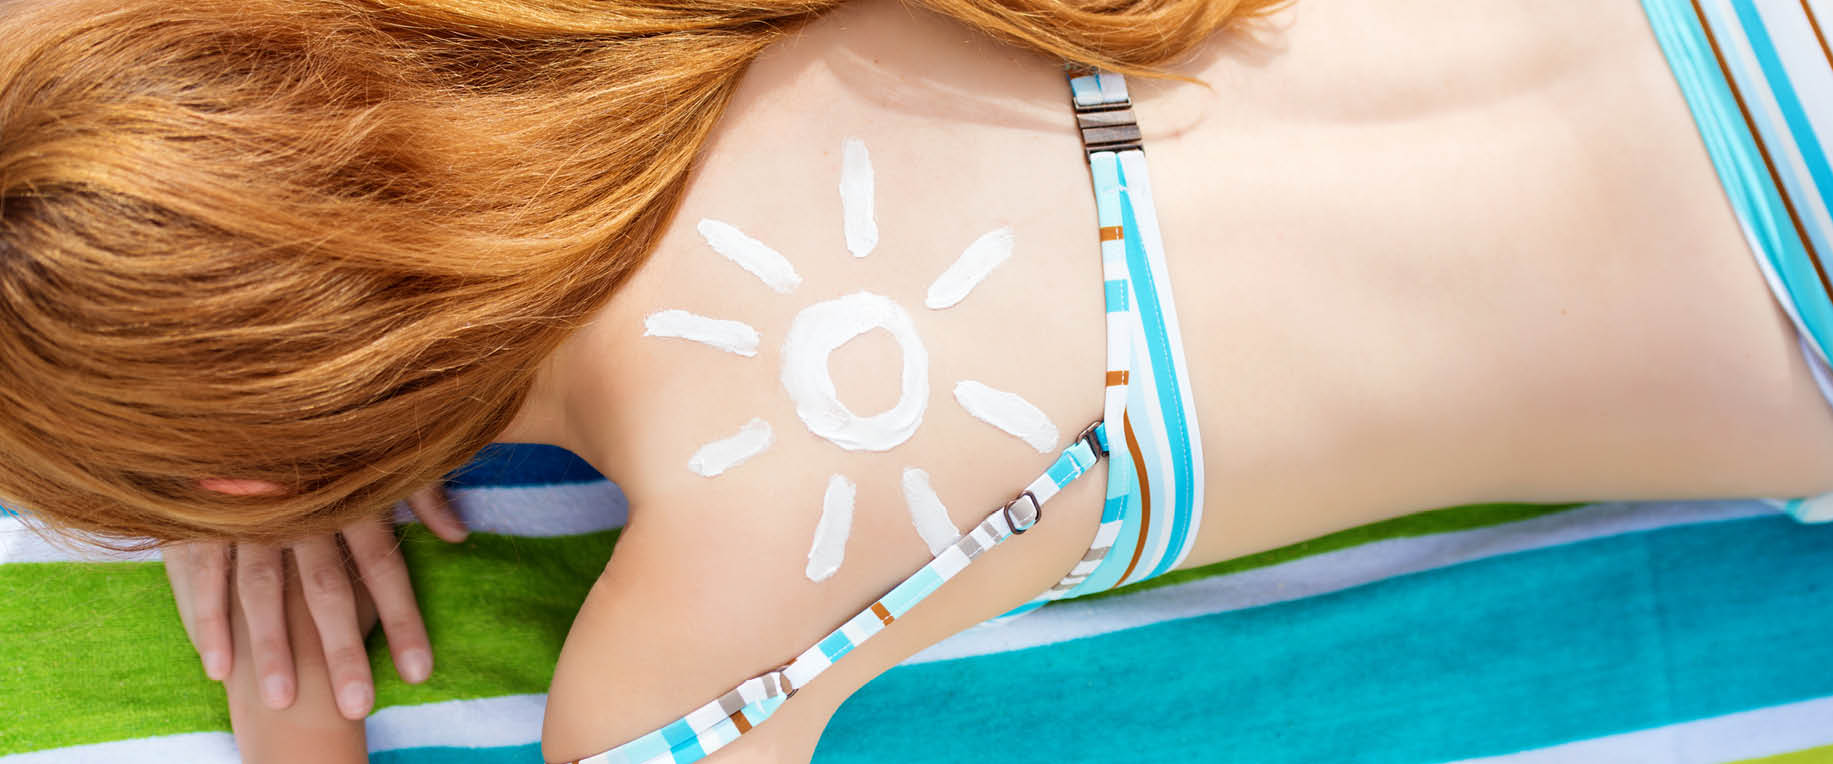 Skin Cancer Facts and Stats